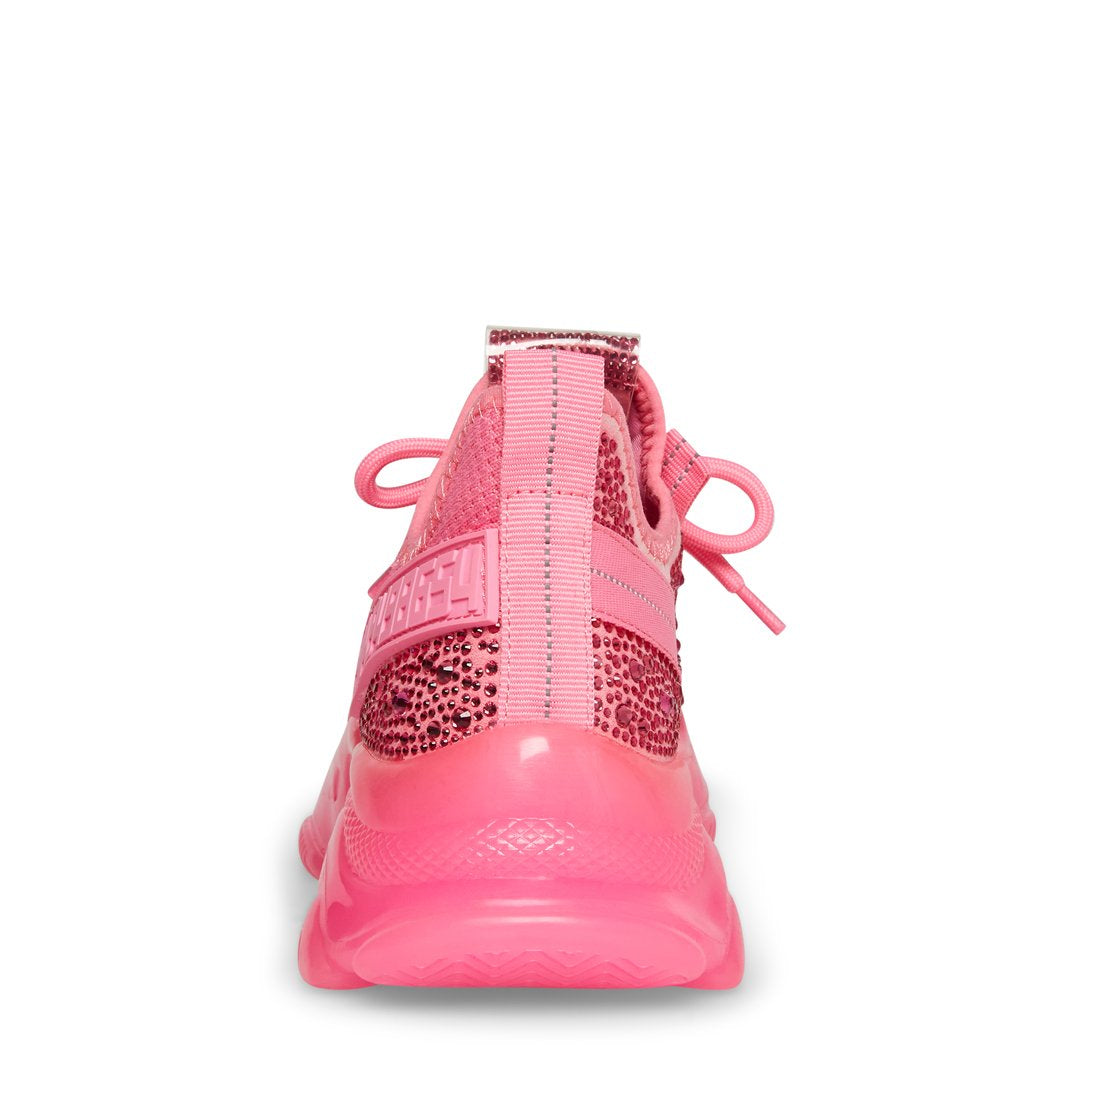 MAXIMA Hot Pink Sneakers | Women's Hot Pink Sneakers with Rhinestones ...